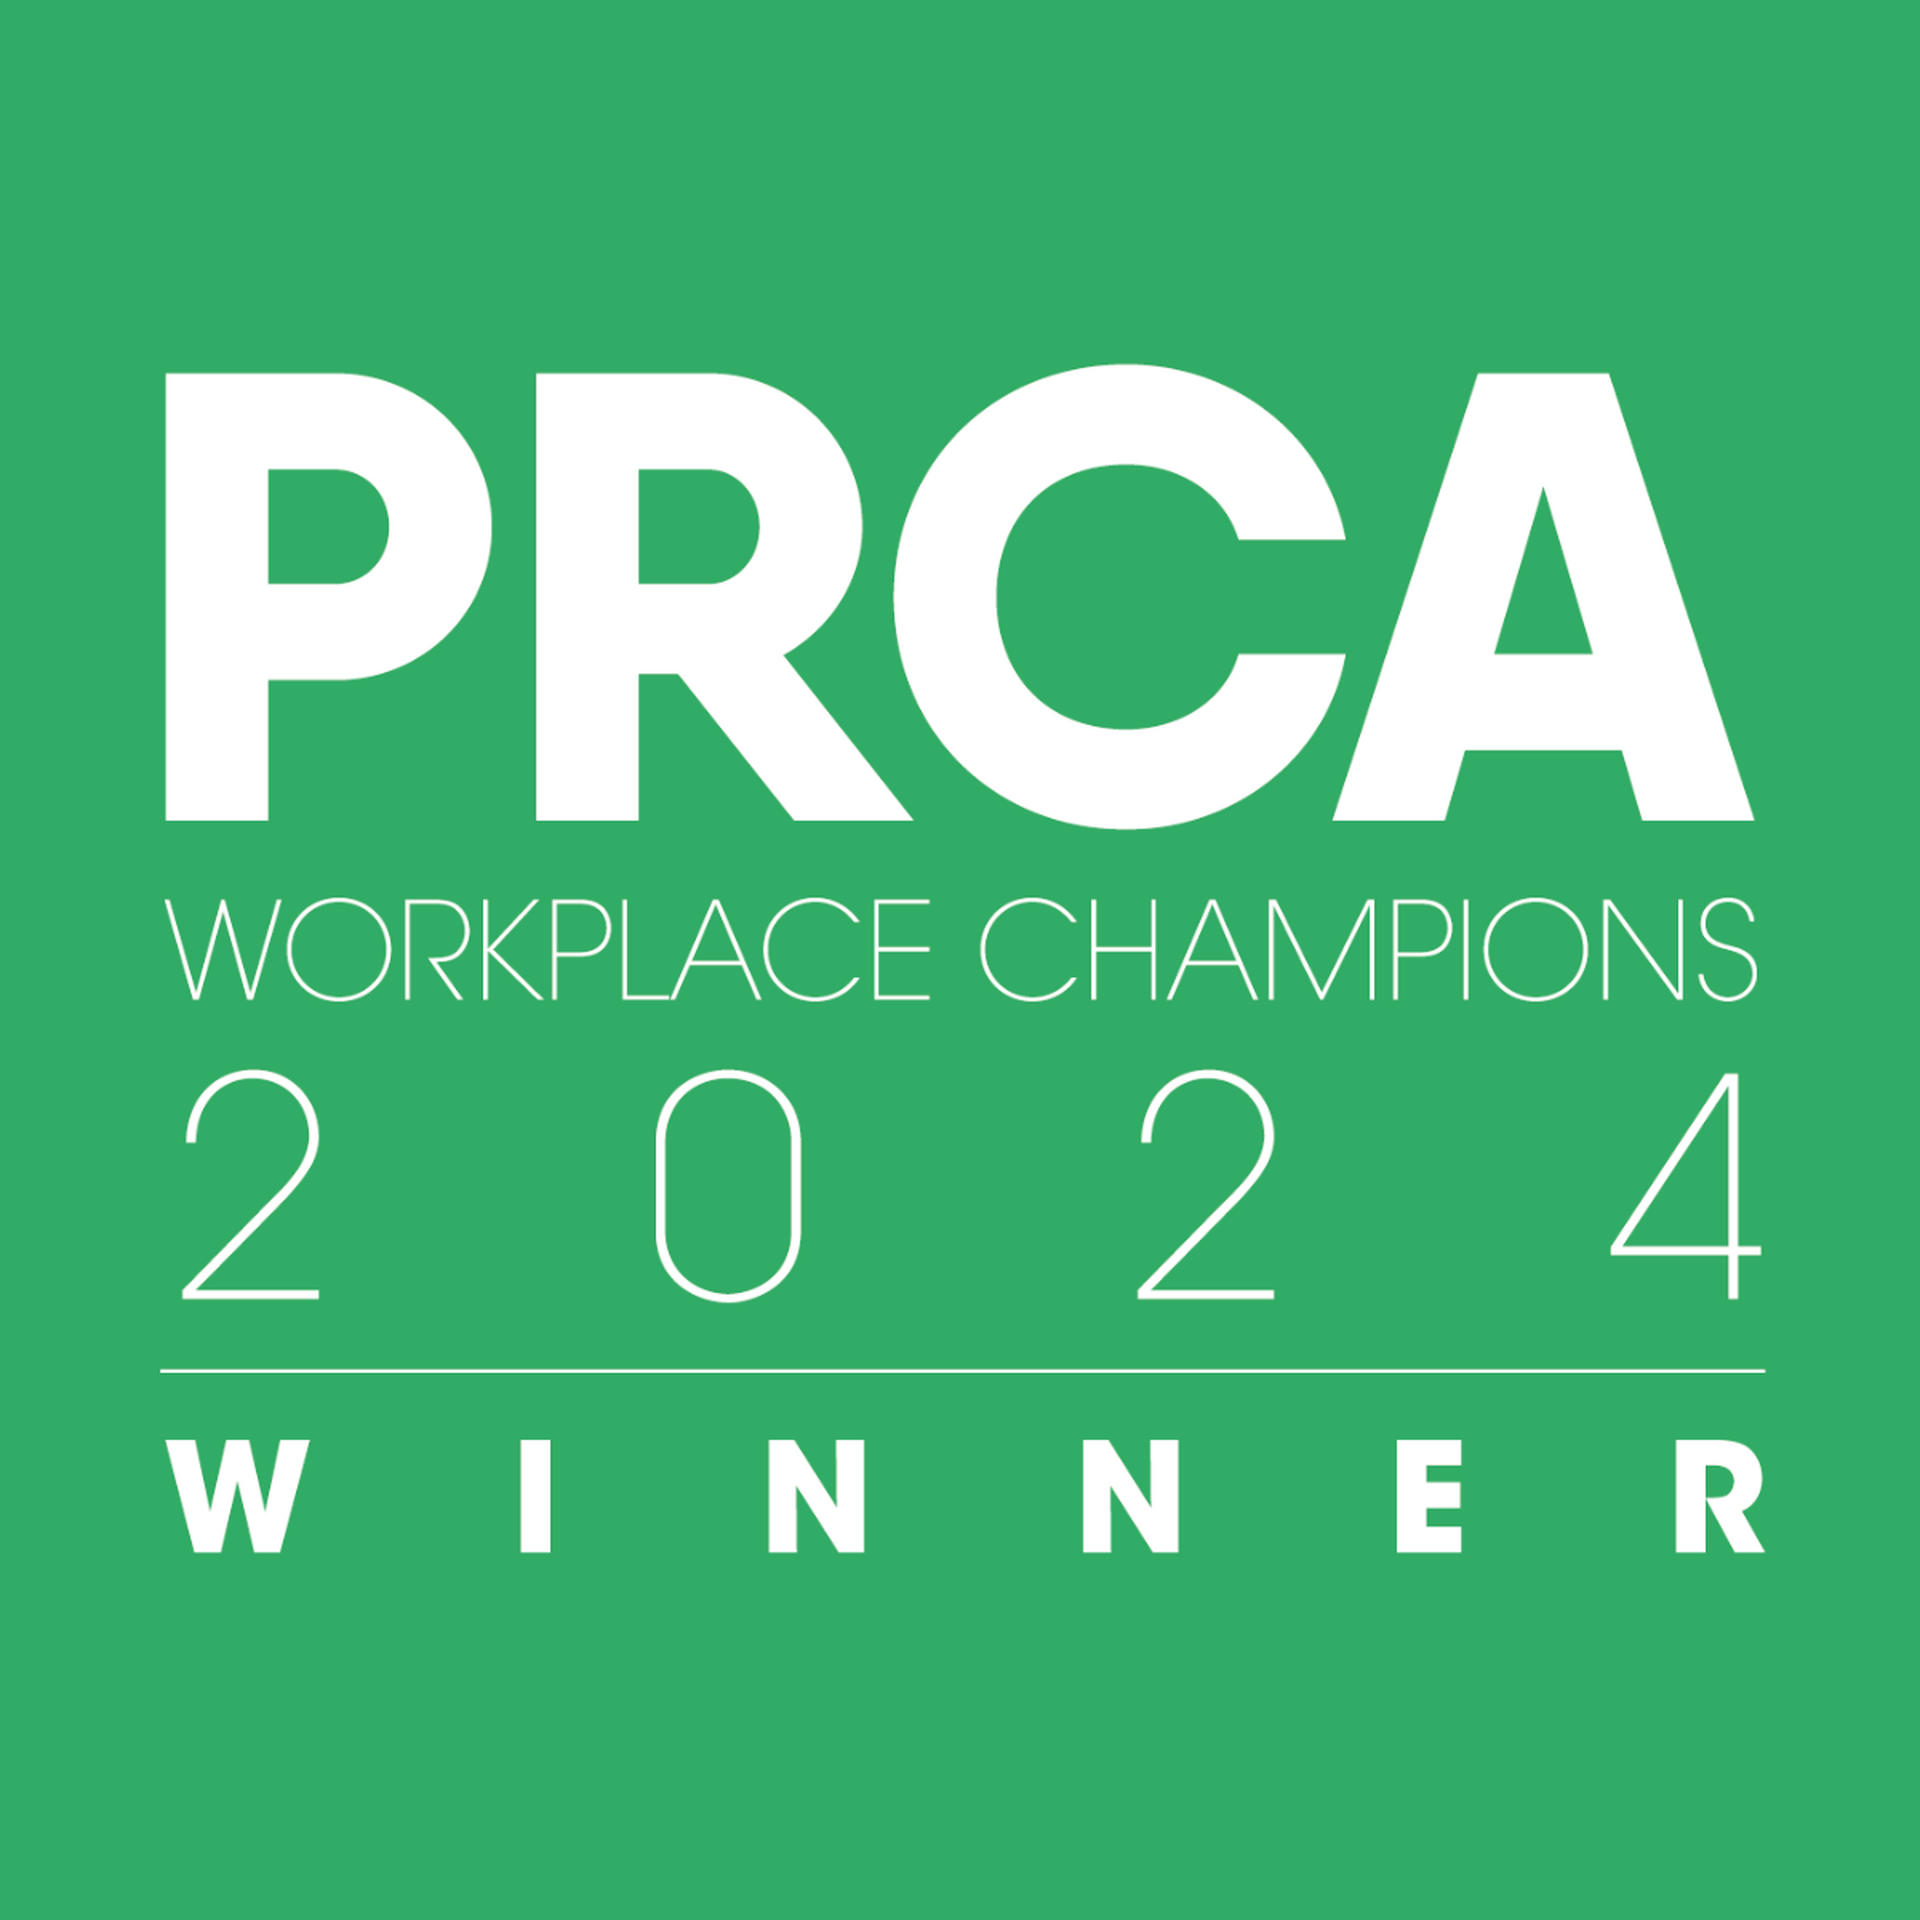 PRCA Workplace Champions 2024